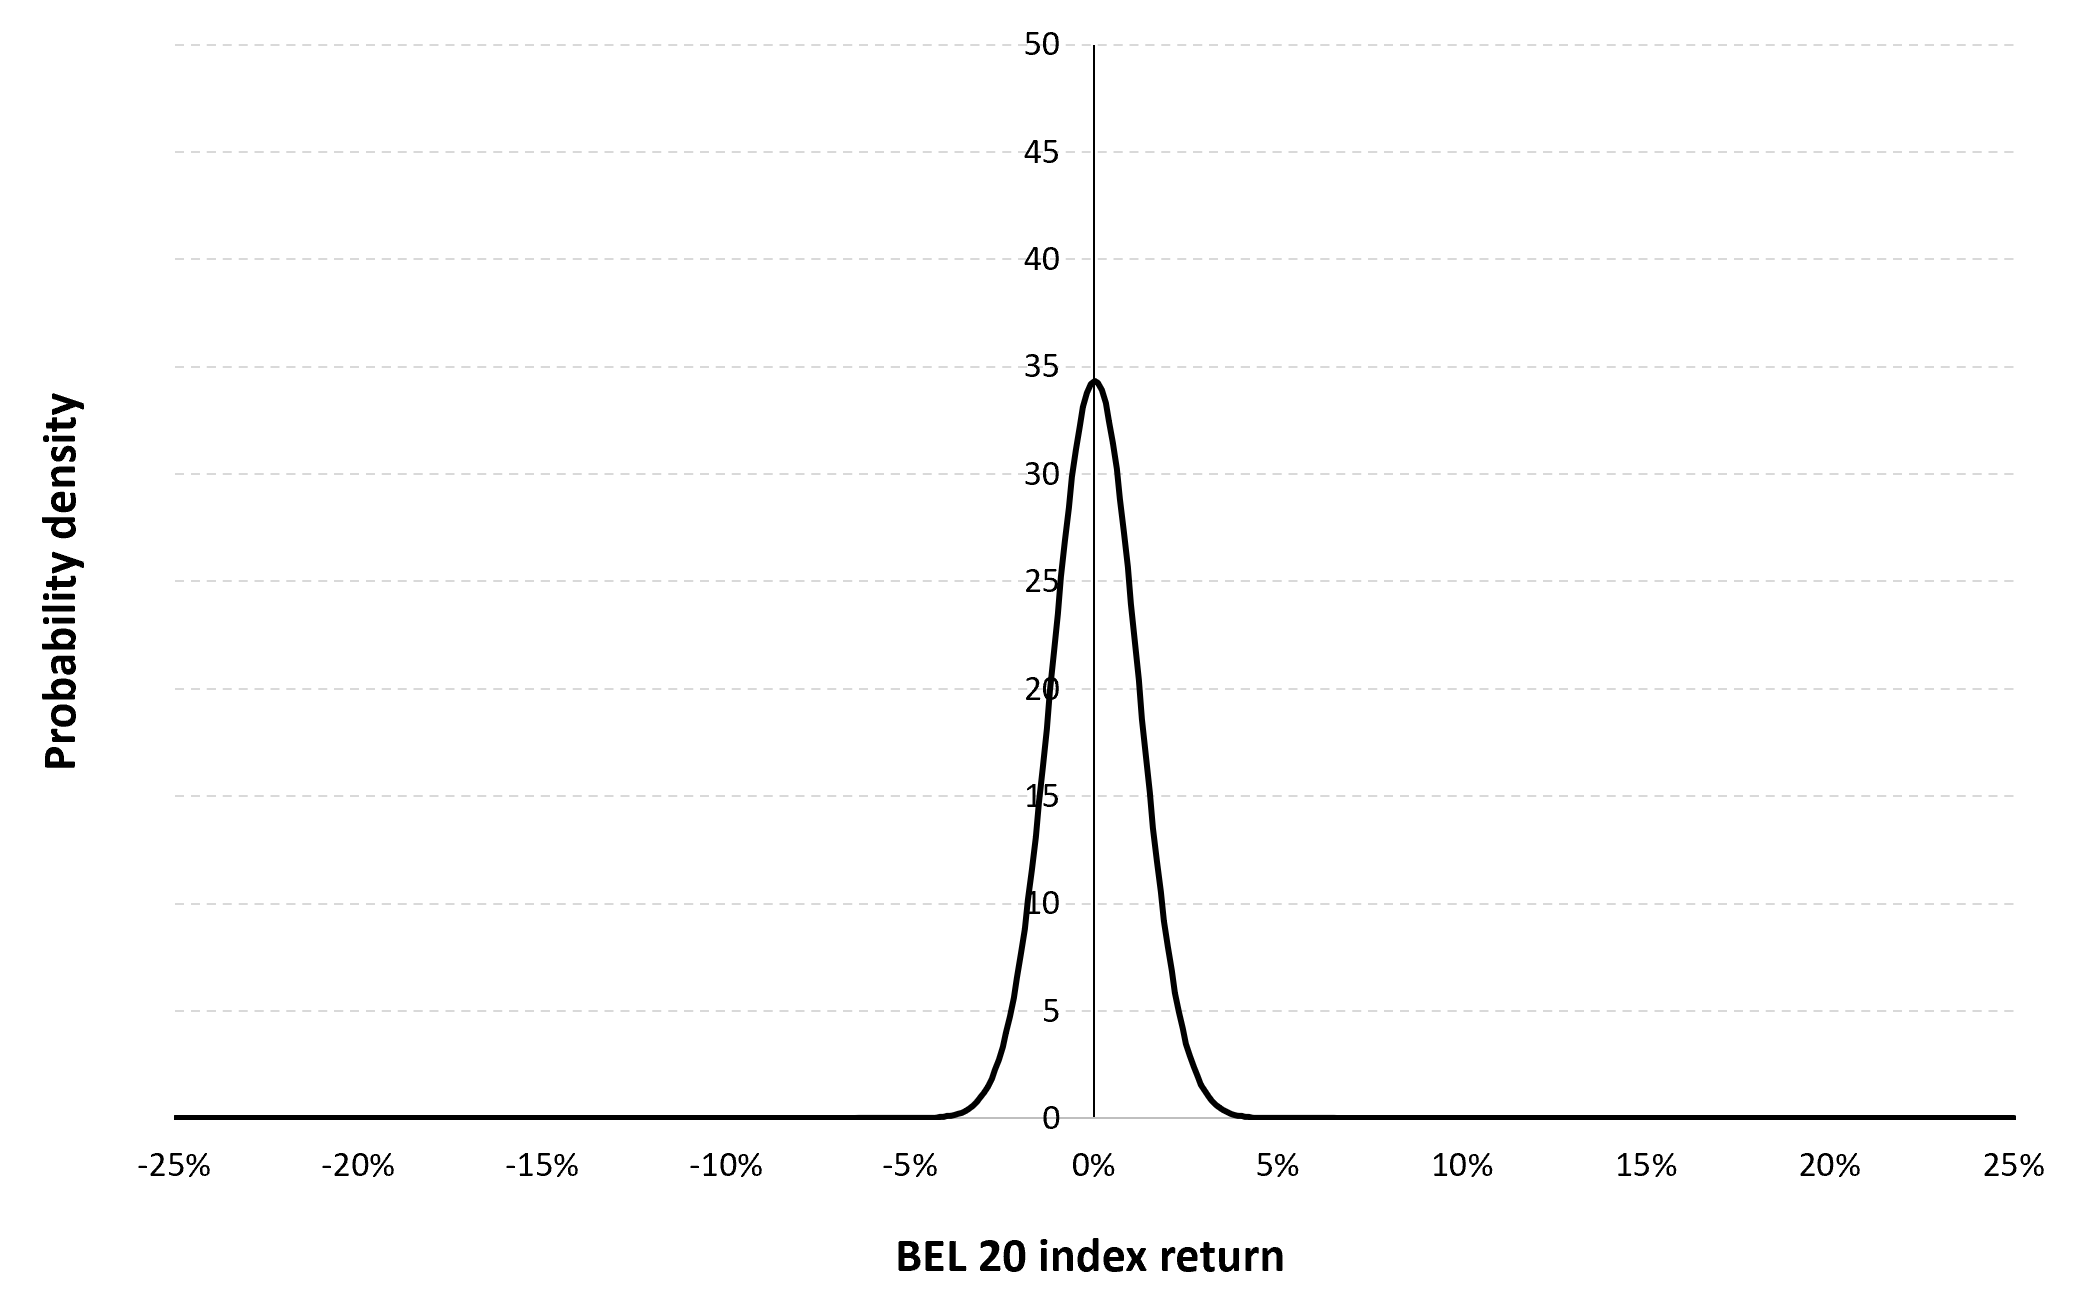 Gaussian distribution of the daily BEL 20 index returns